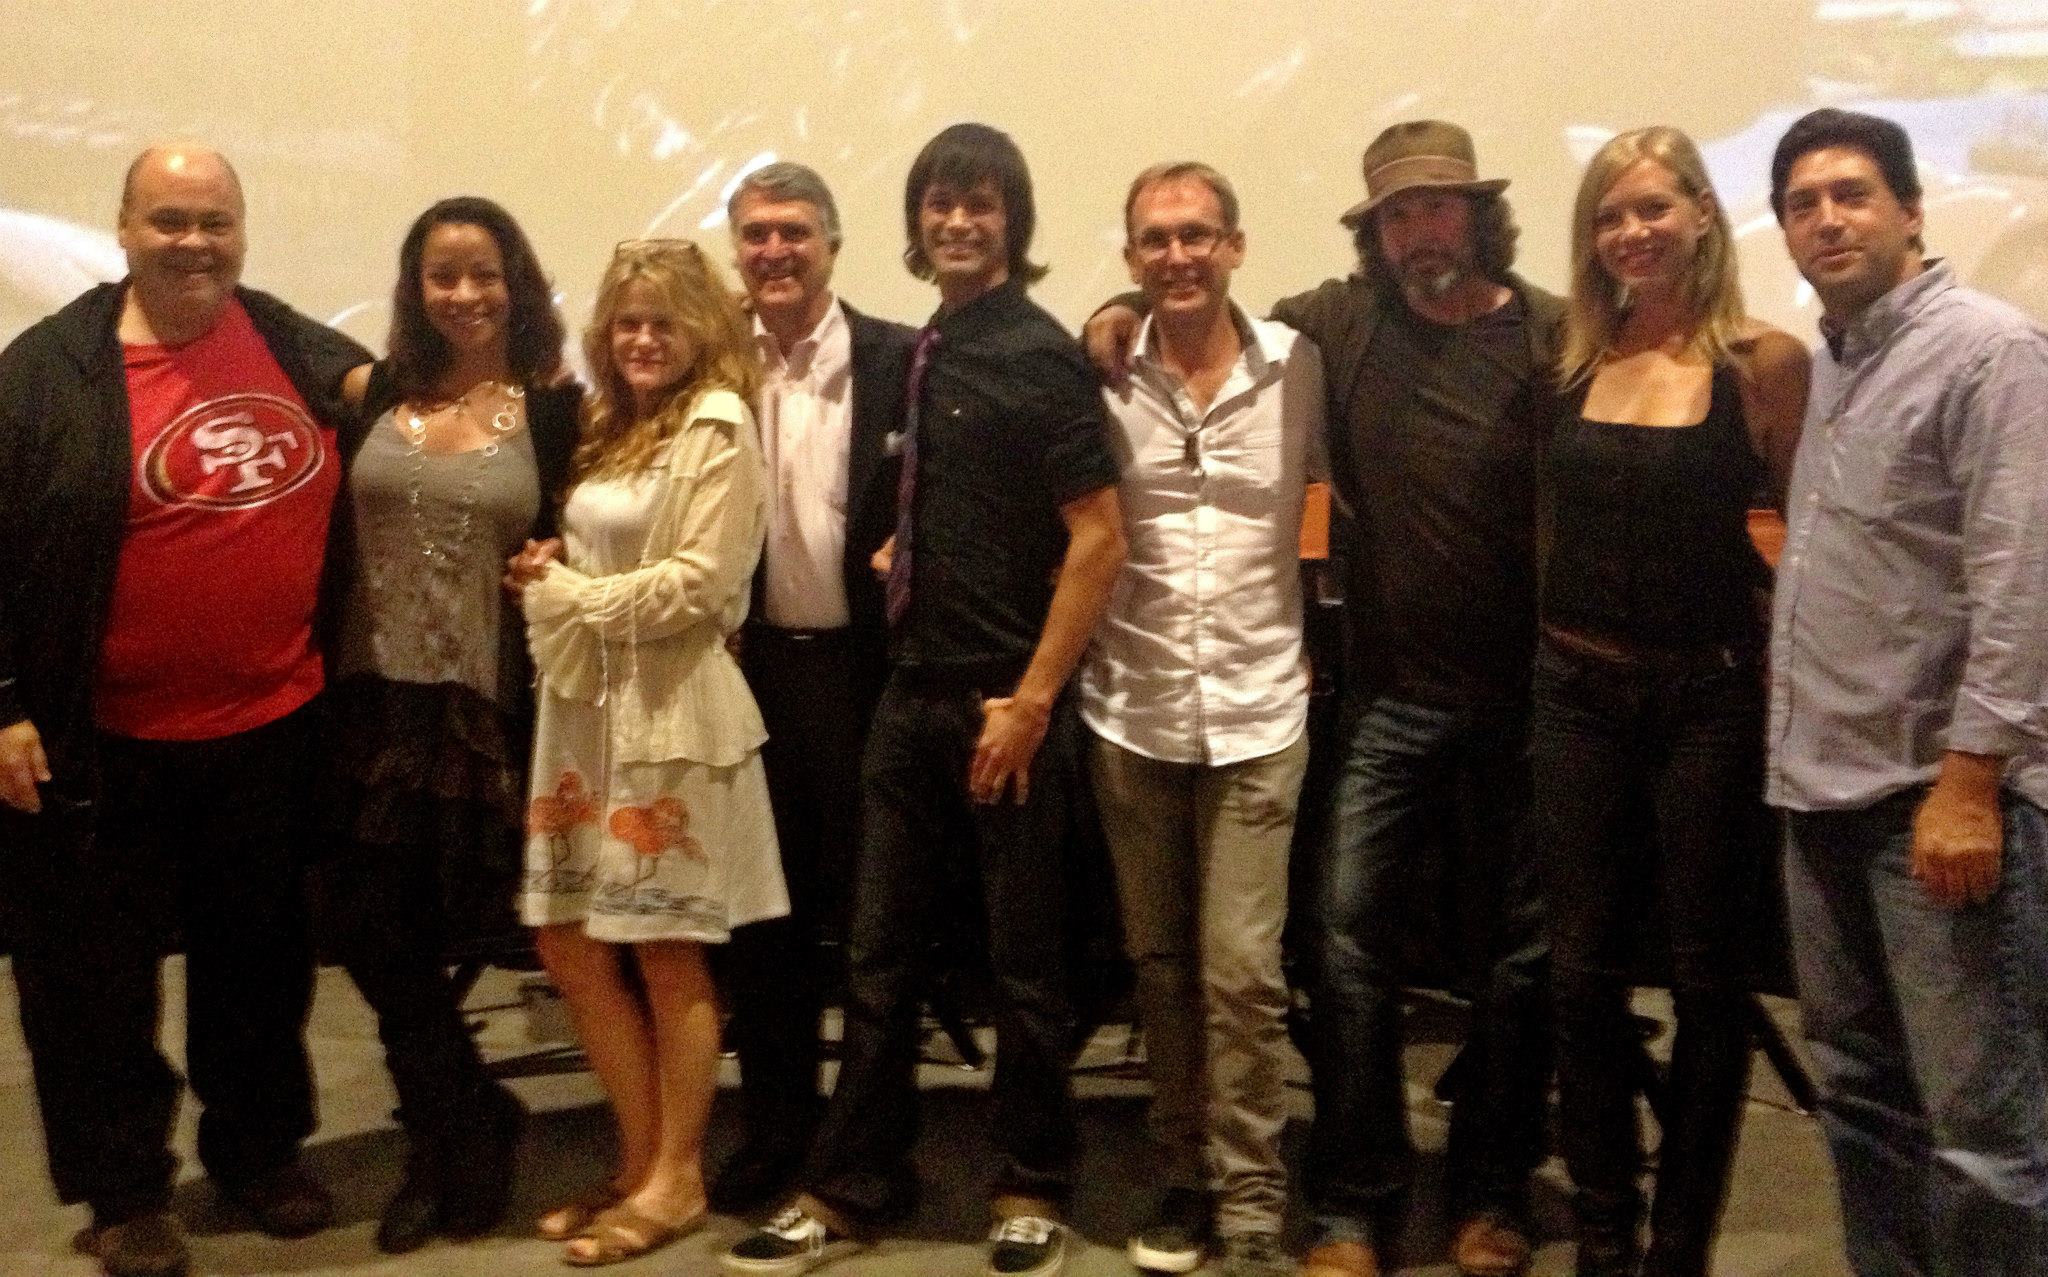 BLUES FOR WILLADEAN Los Angeles Premiere: editor Luis Colina, Debby Holiday, Dale Dickey, Bobby Rearden (prod.), Emerson Collins (prod.), Del Shores (writer/director), David Steen, Rachel Sorsa, Anthony Gore (assoc. prod.)